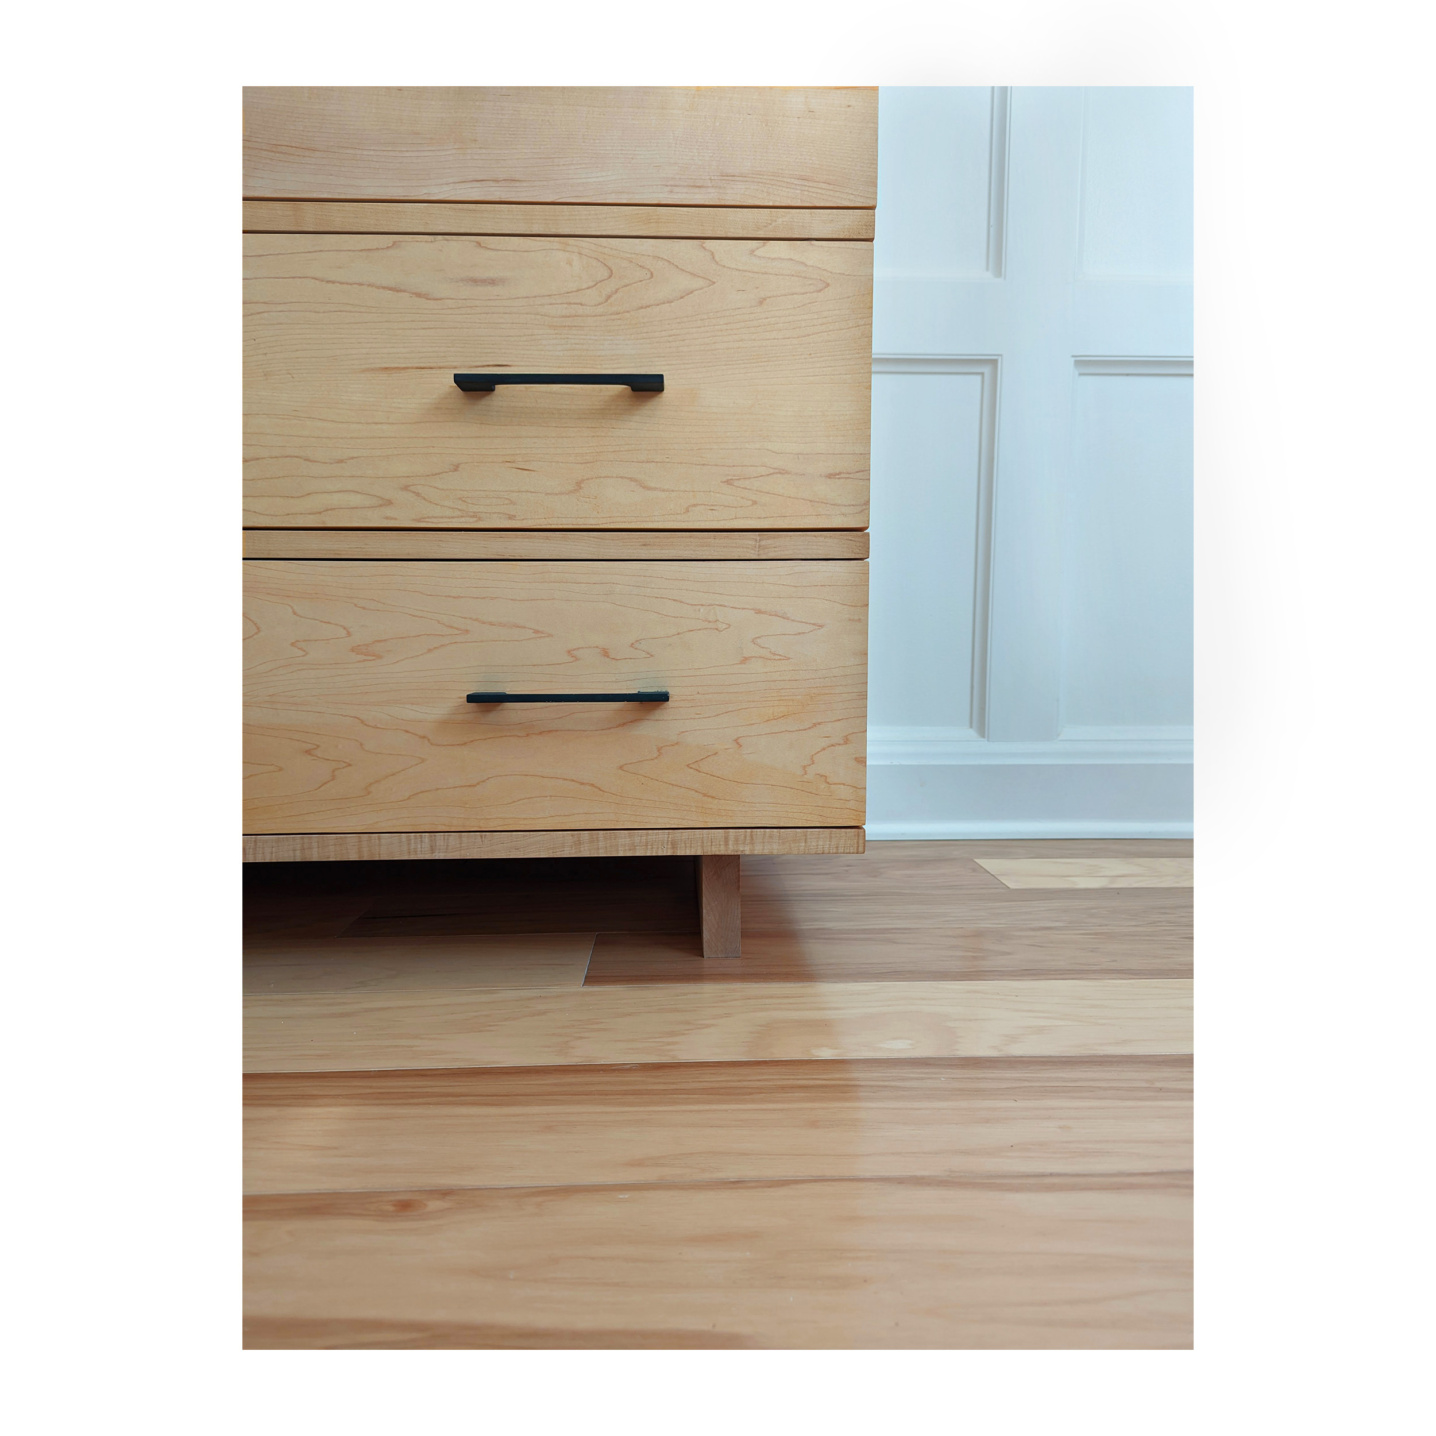 Maple Dresser legs and drawer fronts